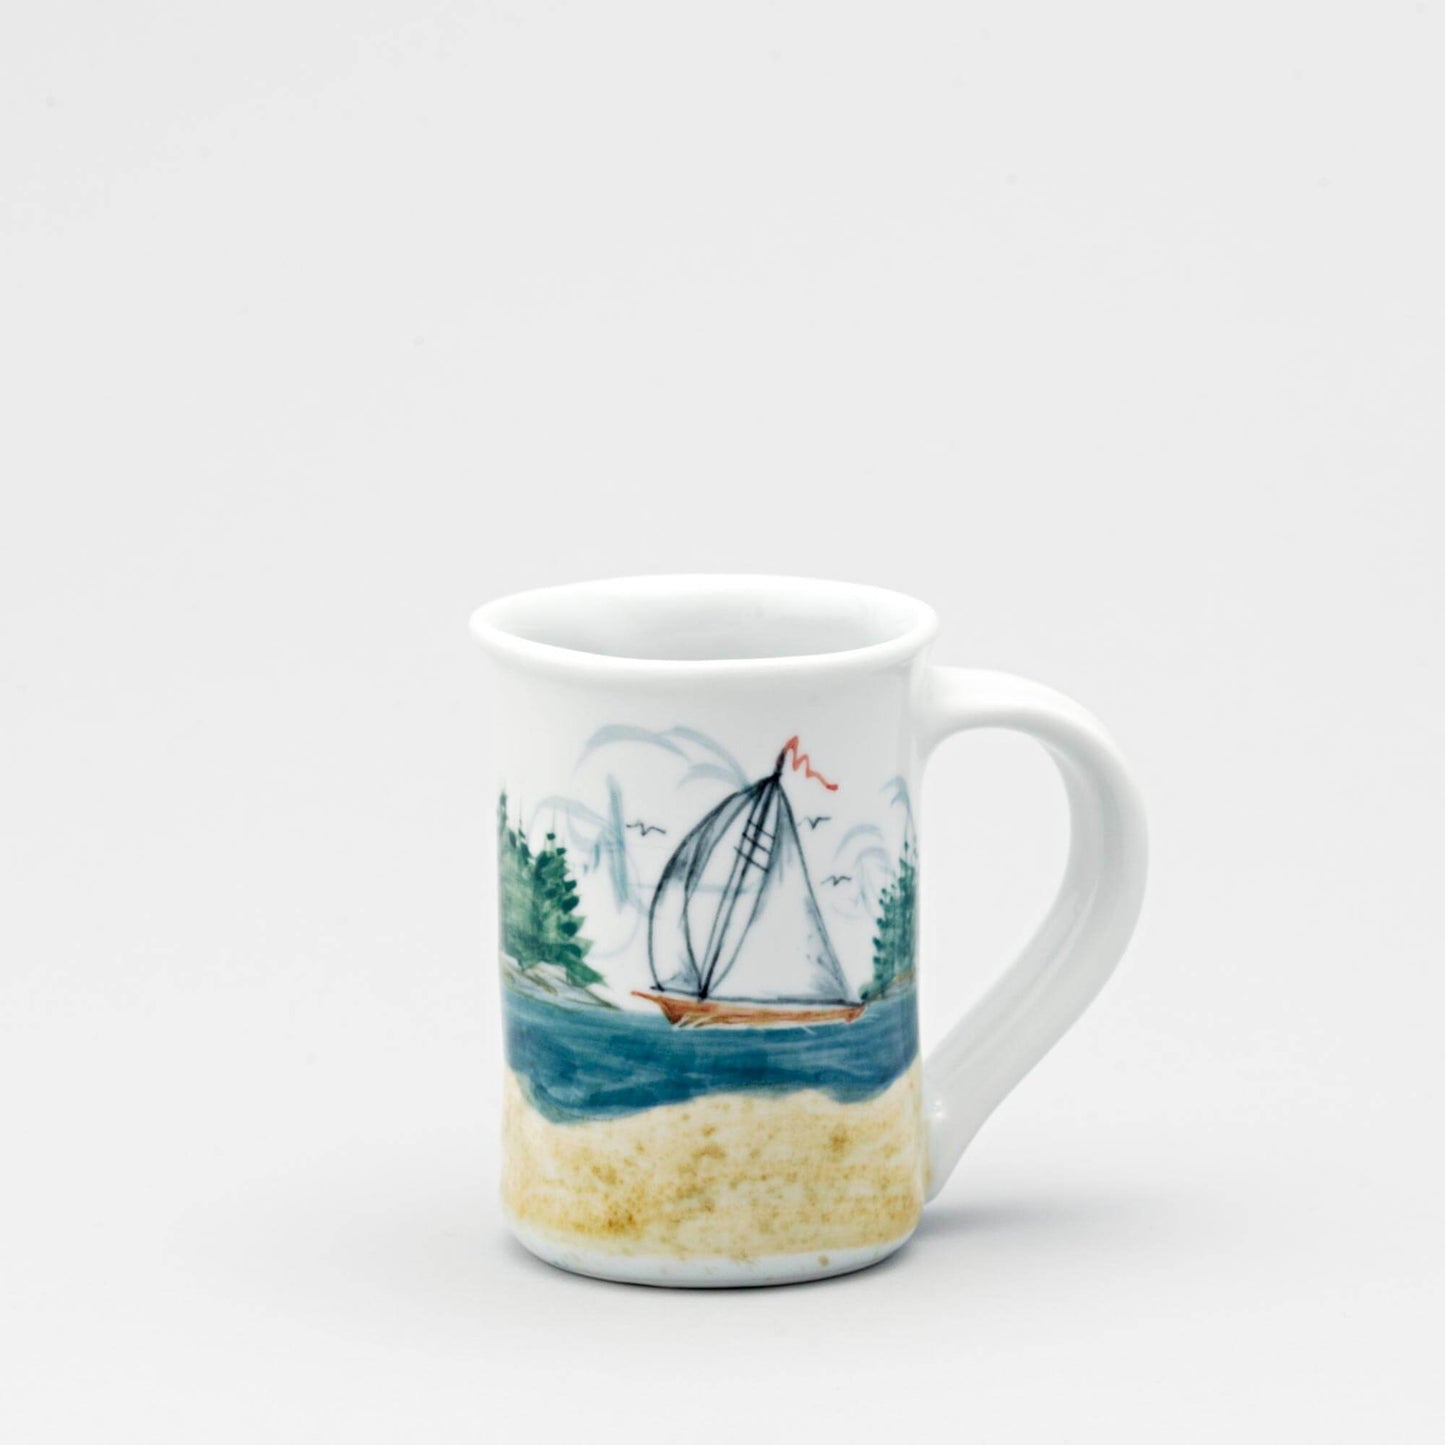 Handmade Pottery Large Mug made by Georgetown Pottery in Maine Sailboat